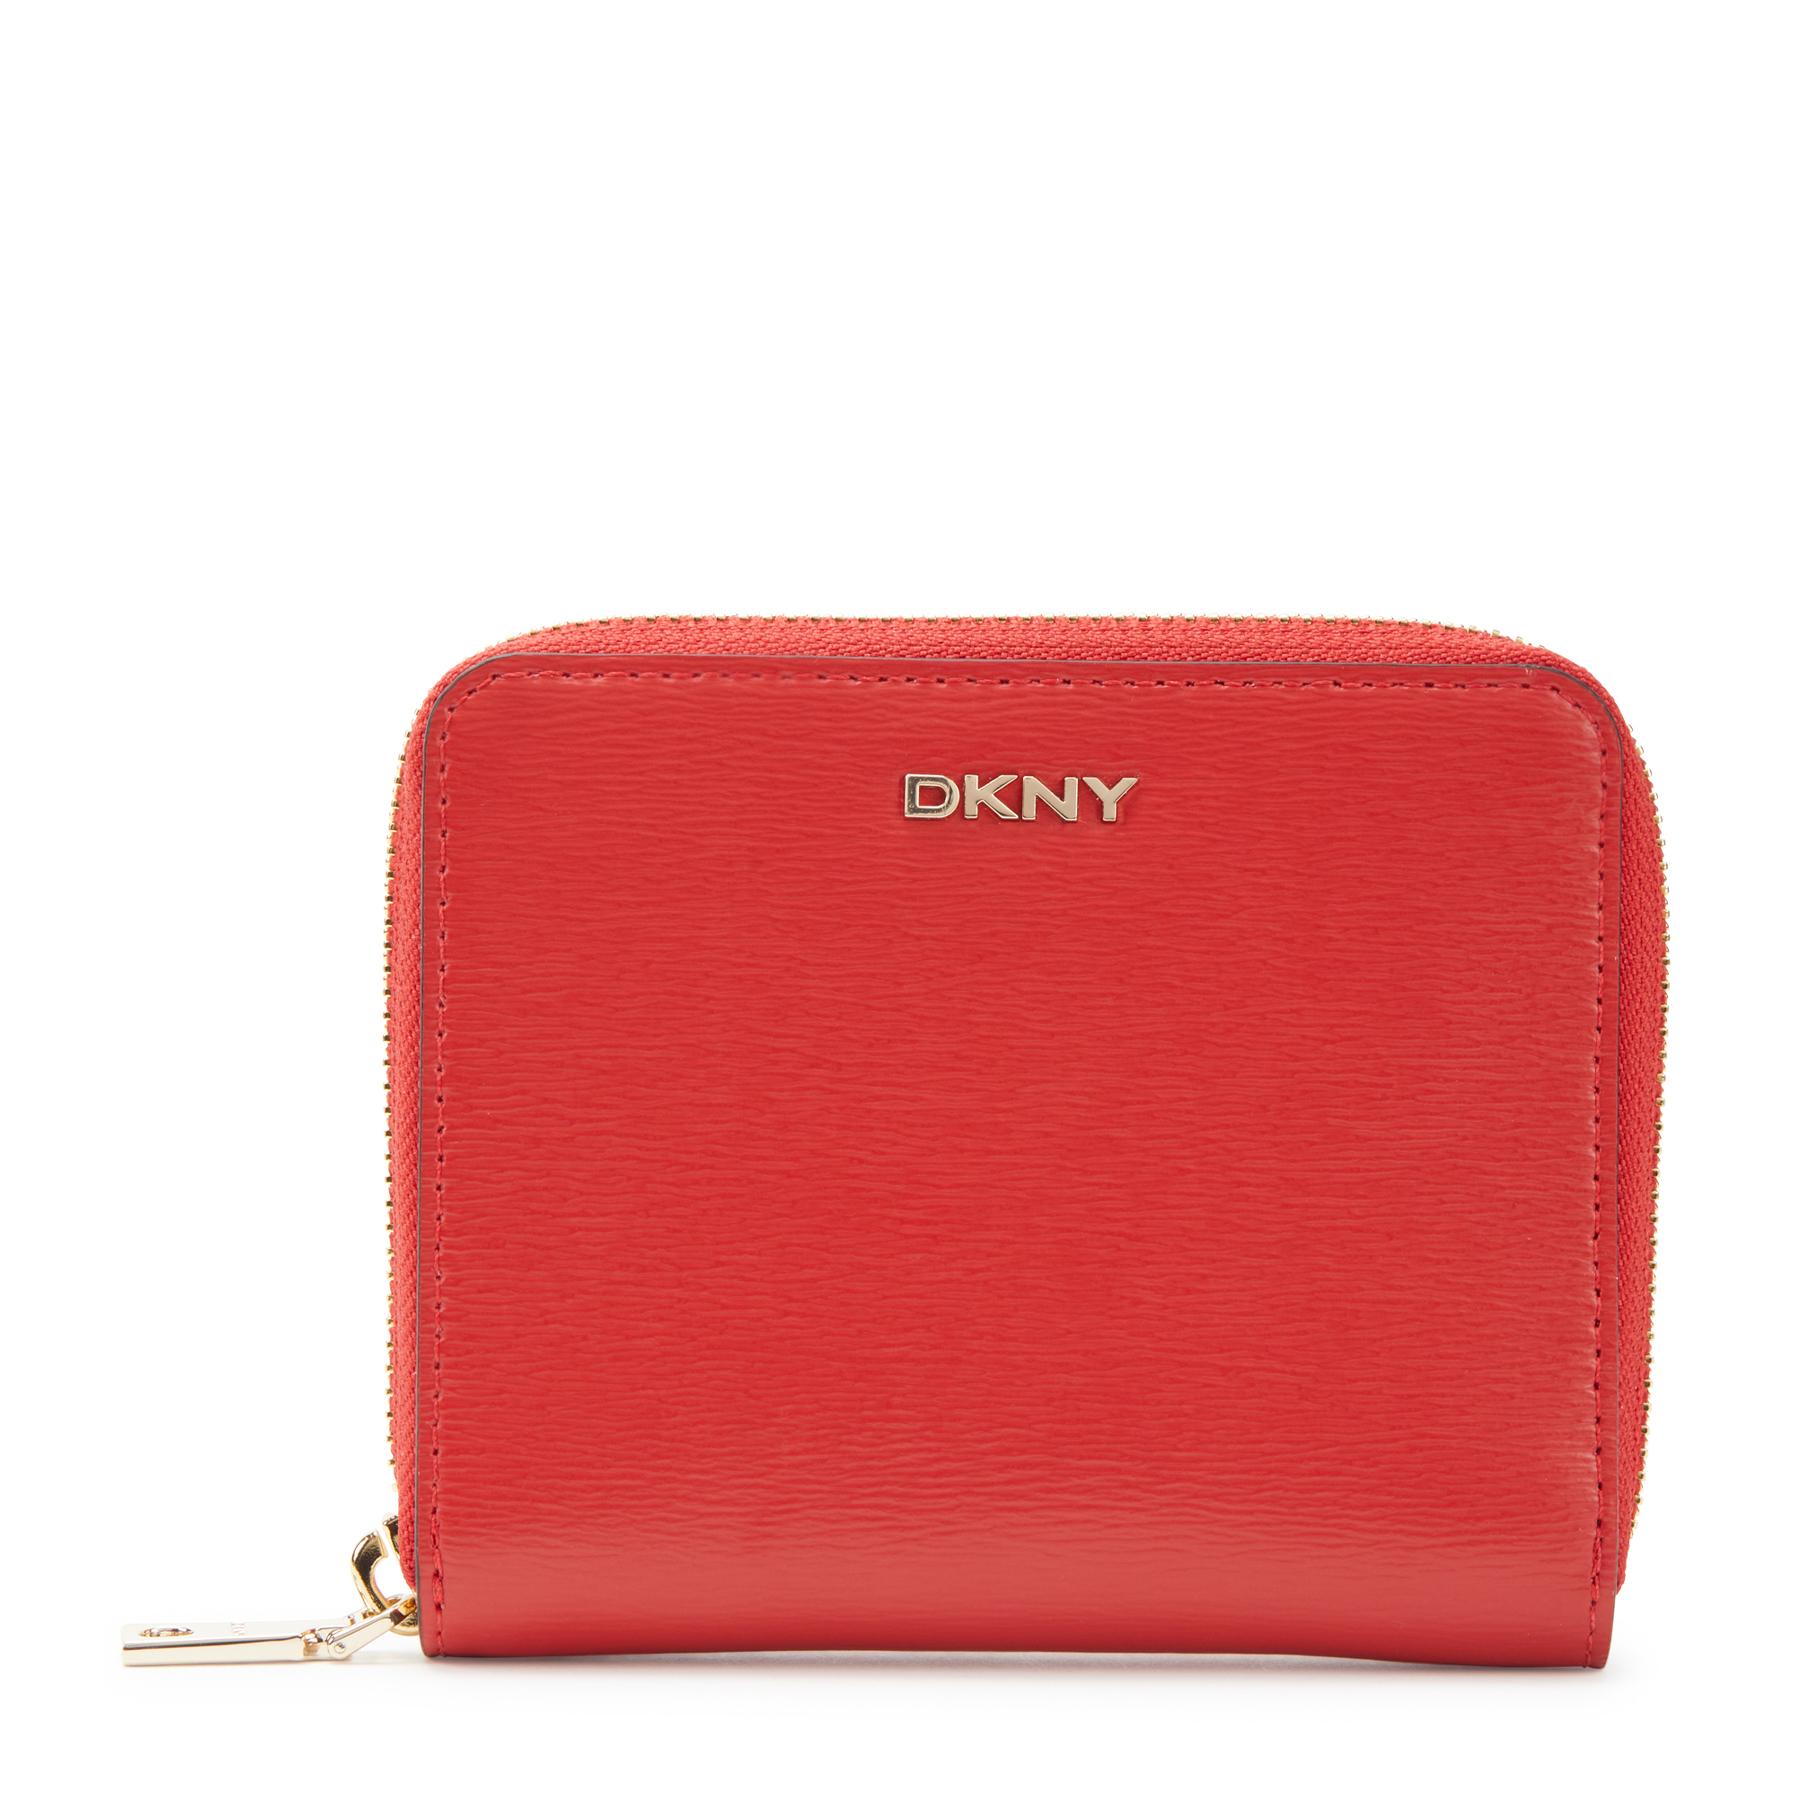 DKNY Bryant Small Zip Around Purse in Red | Lyst